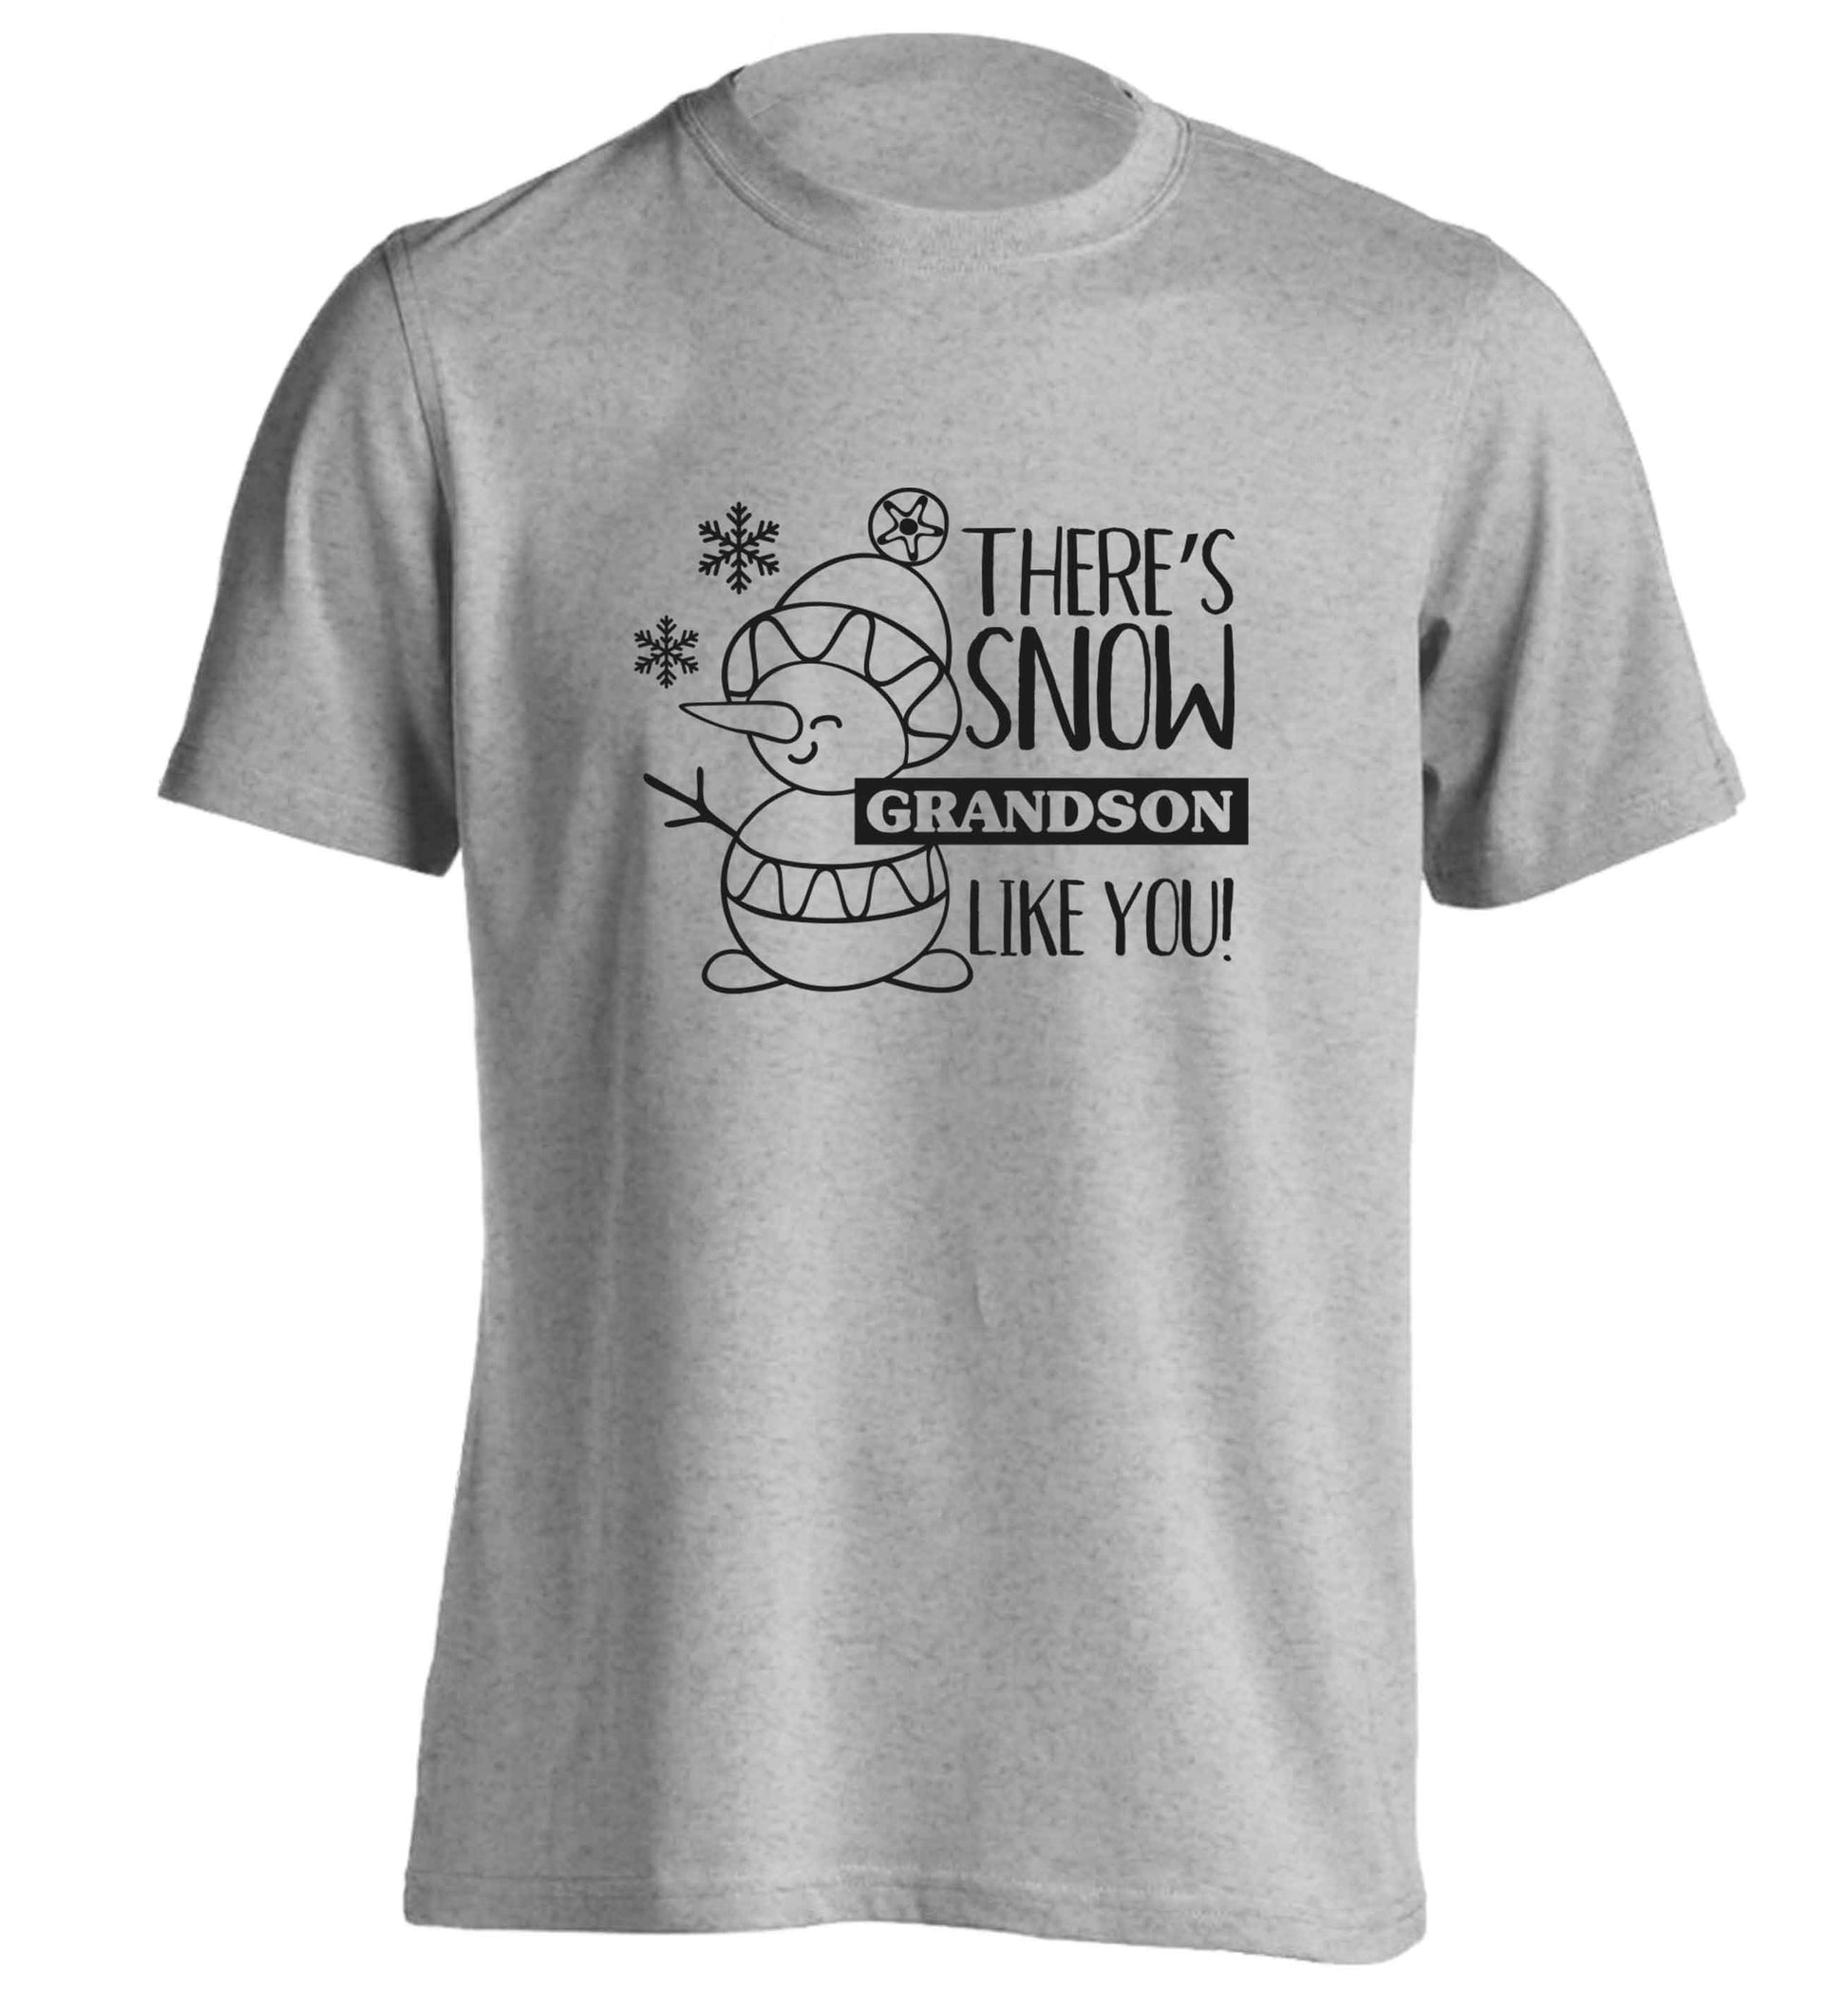 There's snow grandson like you adults unisex grey Tshirt 2XL